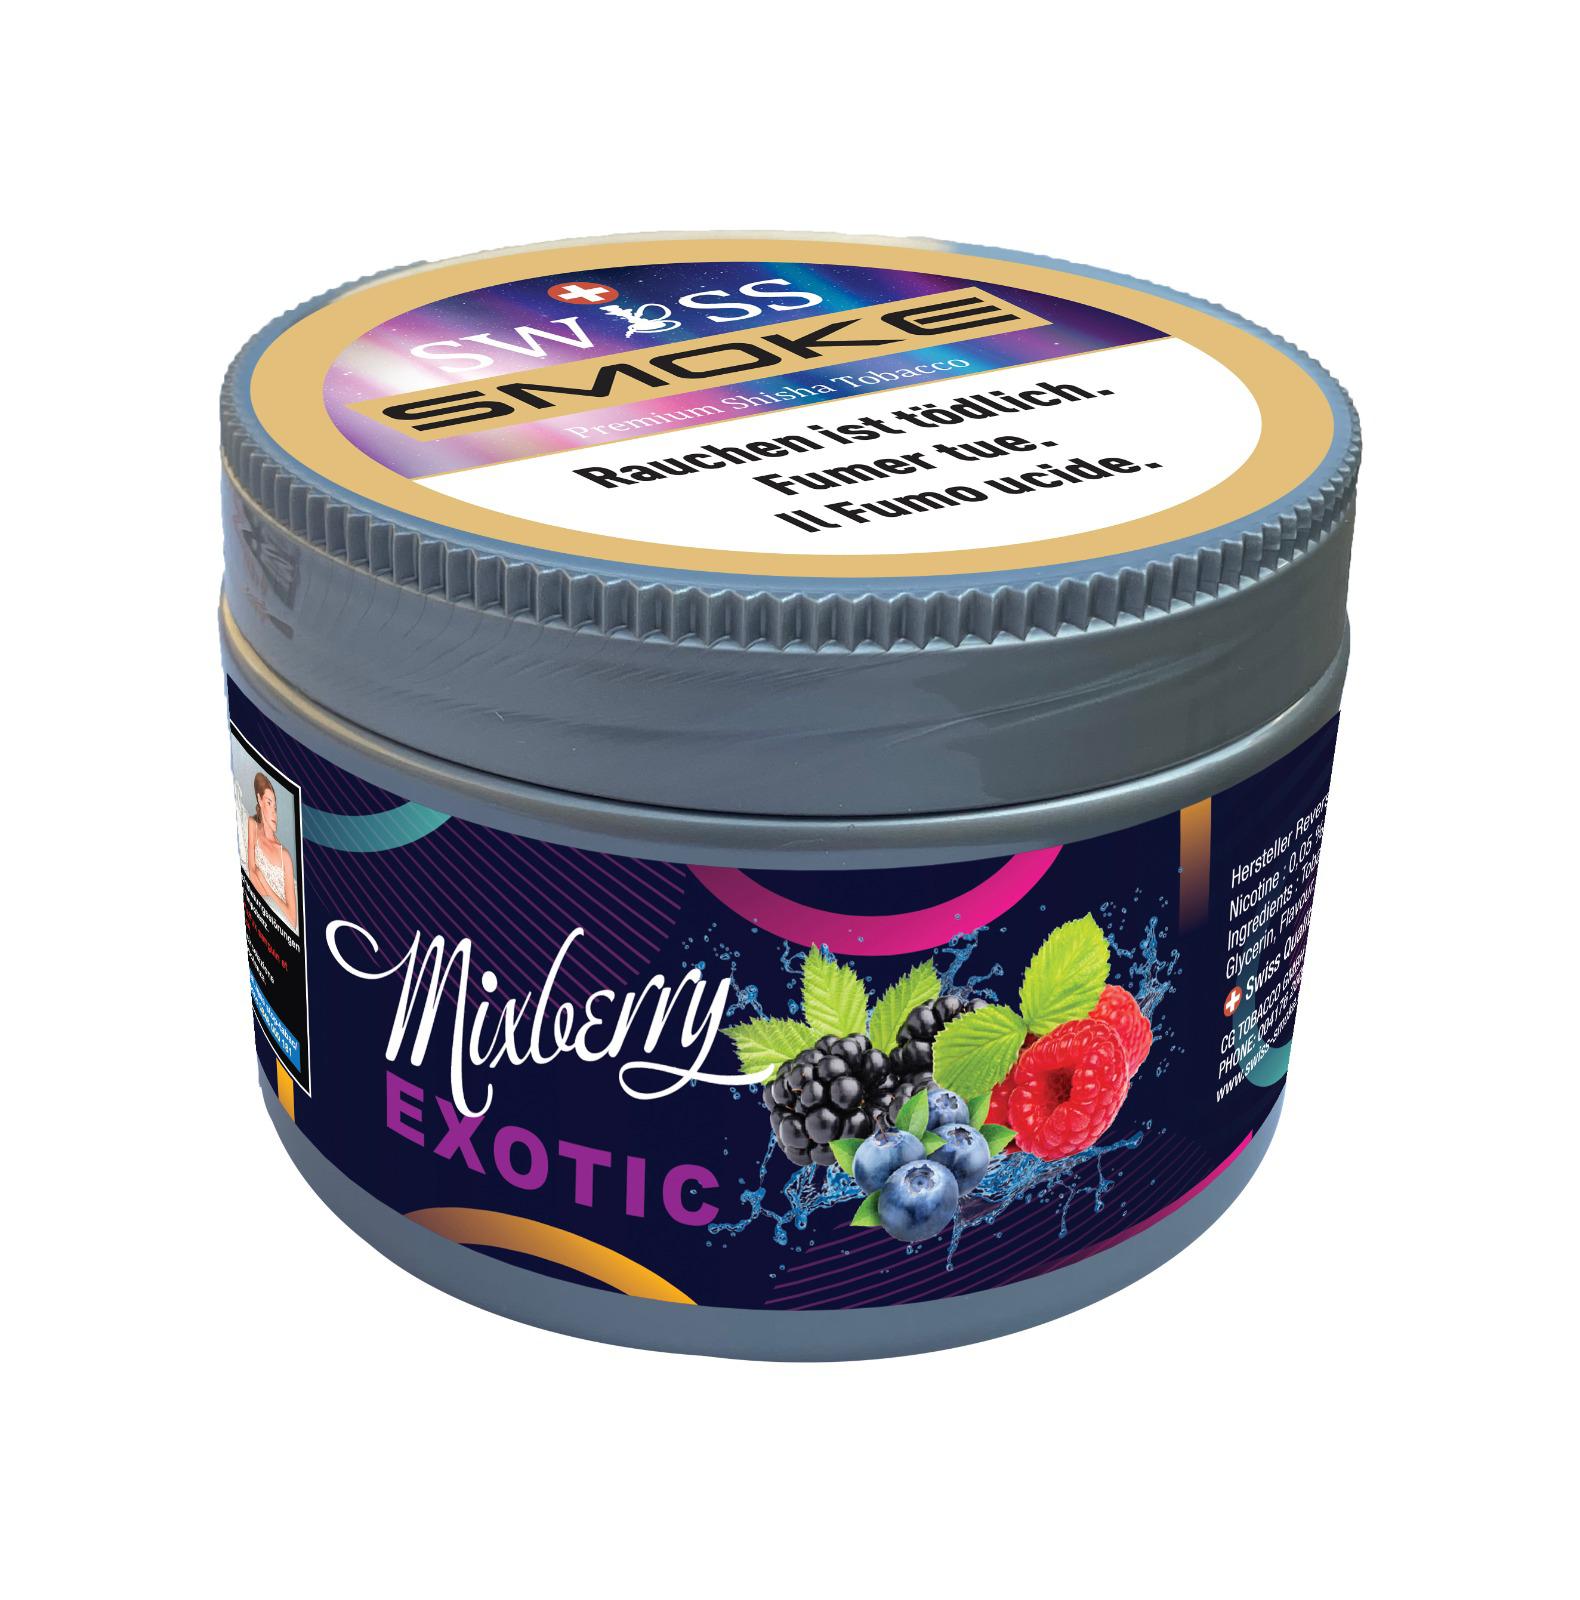 Mixberry Exotic 200g